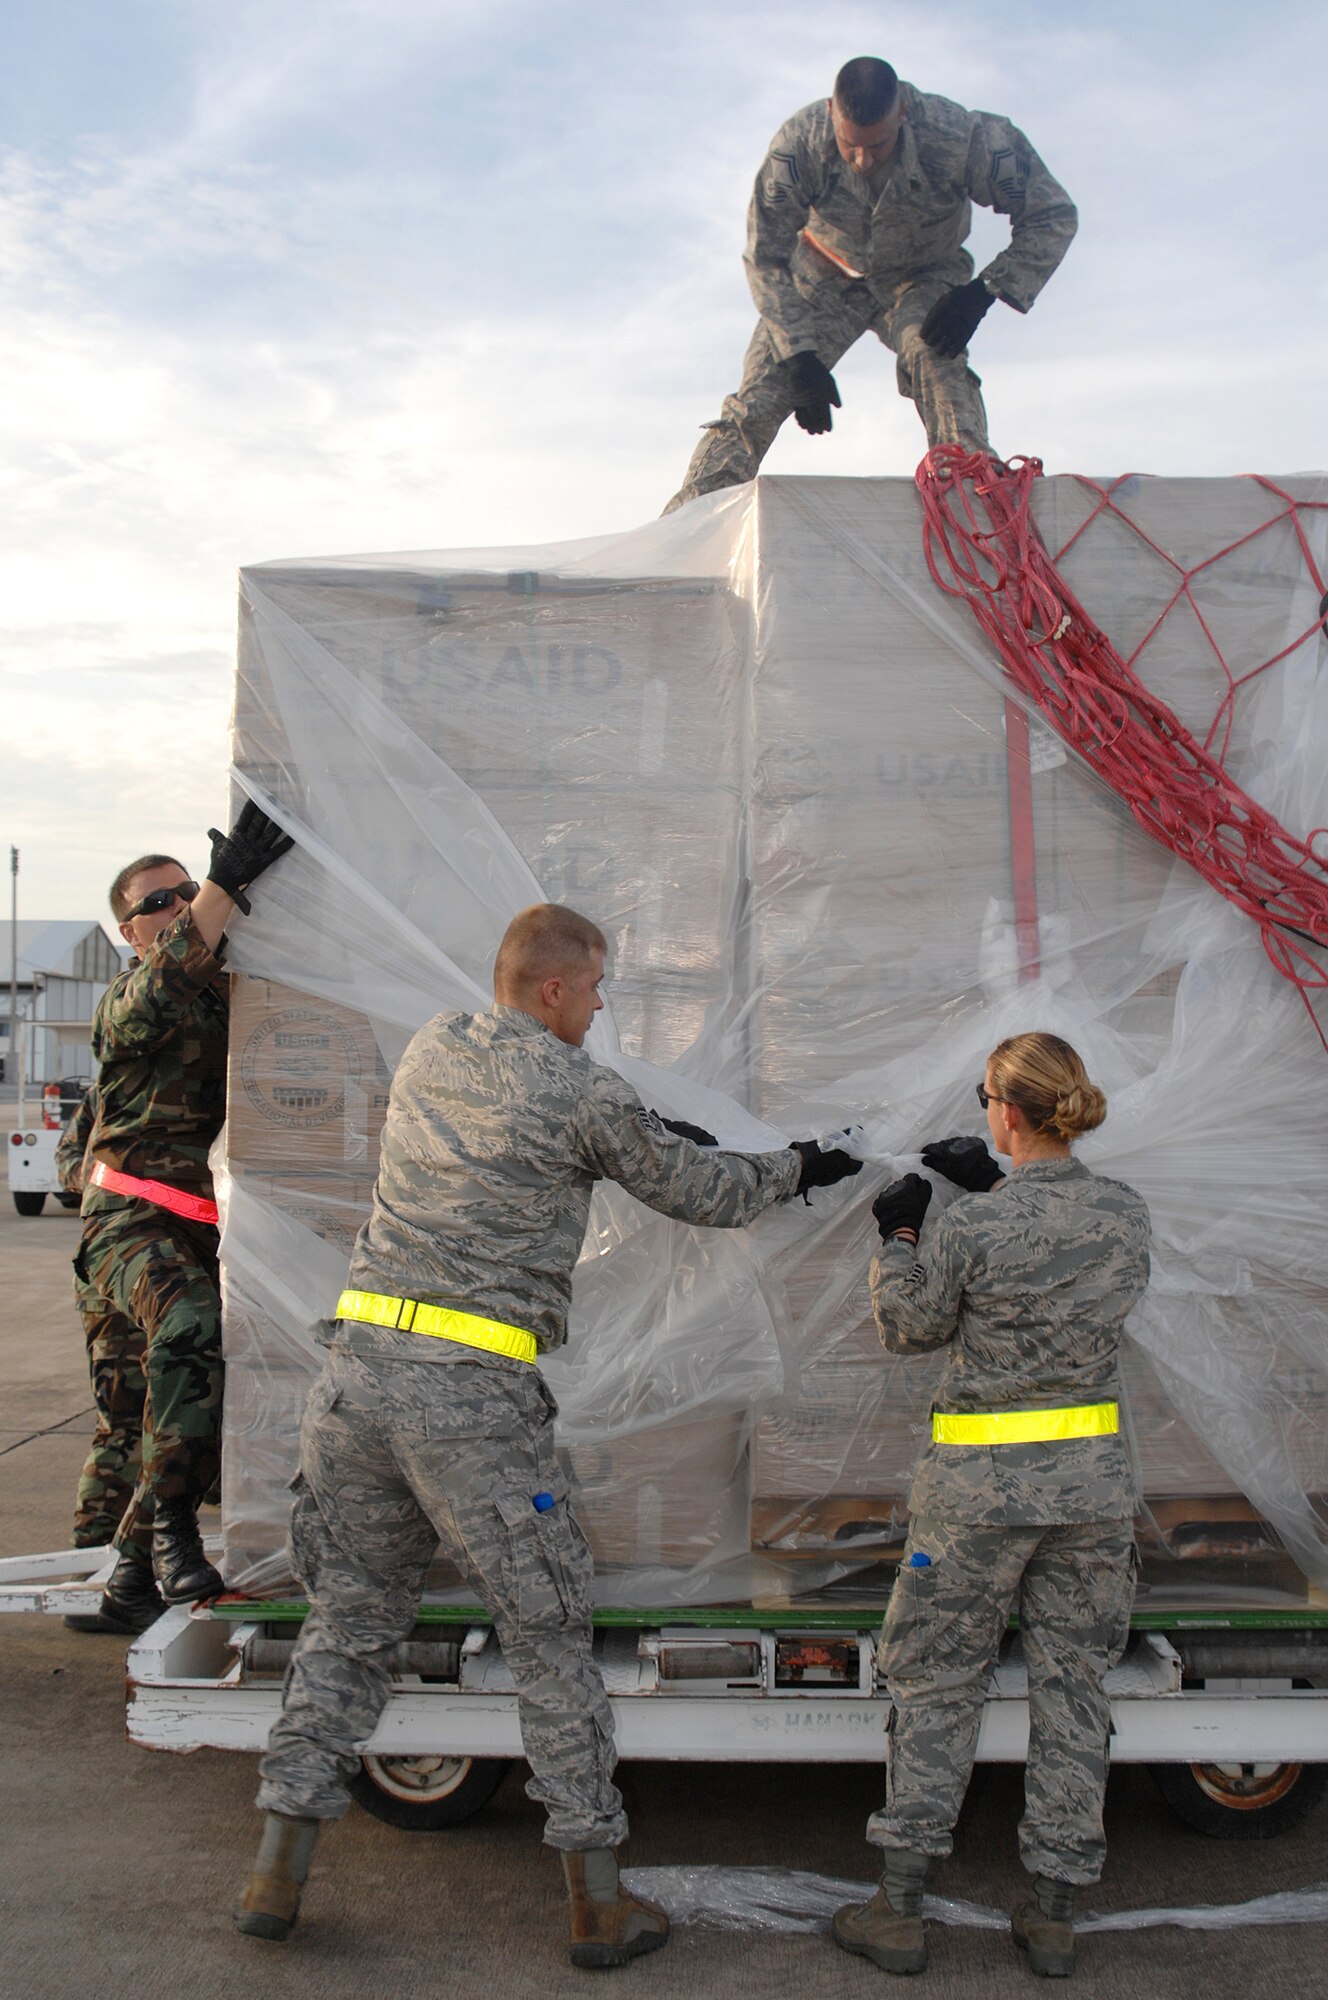 Utapao, Thailand - Airmen from Andersen AFB, Guam download humanitarian relief supplies from a Boeing 747 commercial airplane in preparation for its delivery to Burma May 16. Approximately 45 members forward deployed with the 36th Contingency Response Squadron to provide their assistance with aid and recovery after Cyclone Nargis struck on May 2. (USAF photo/Senior Airman Sonya Croston)(RELEASED)